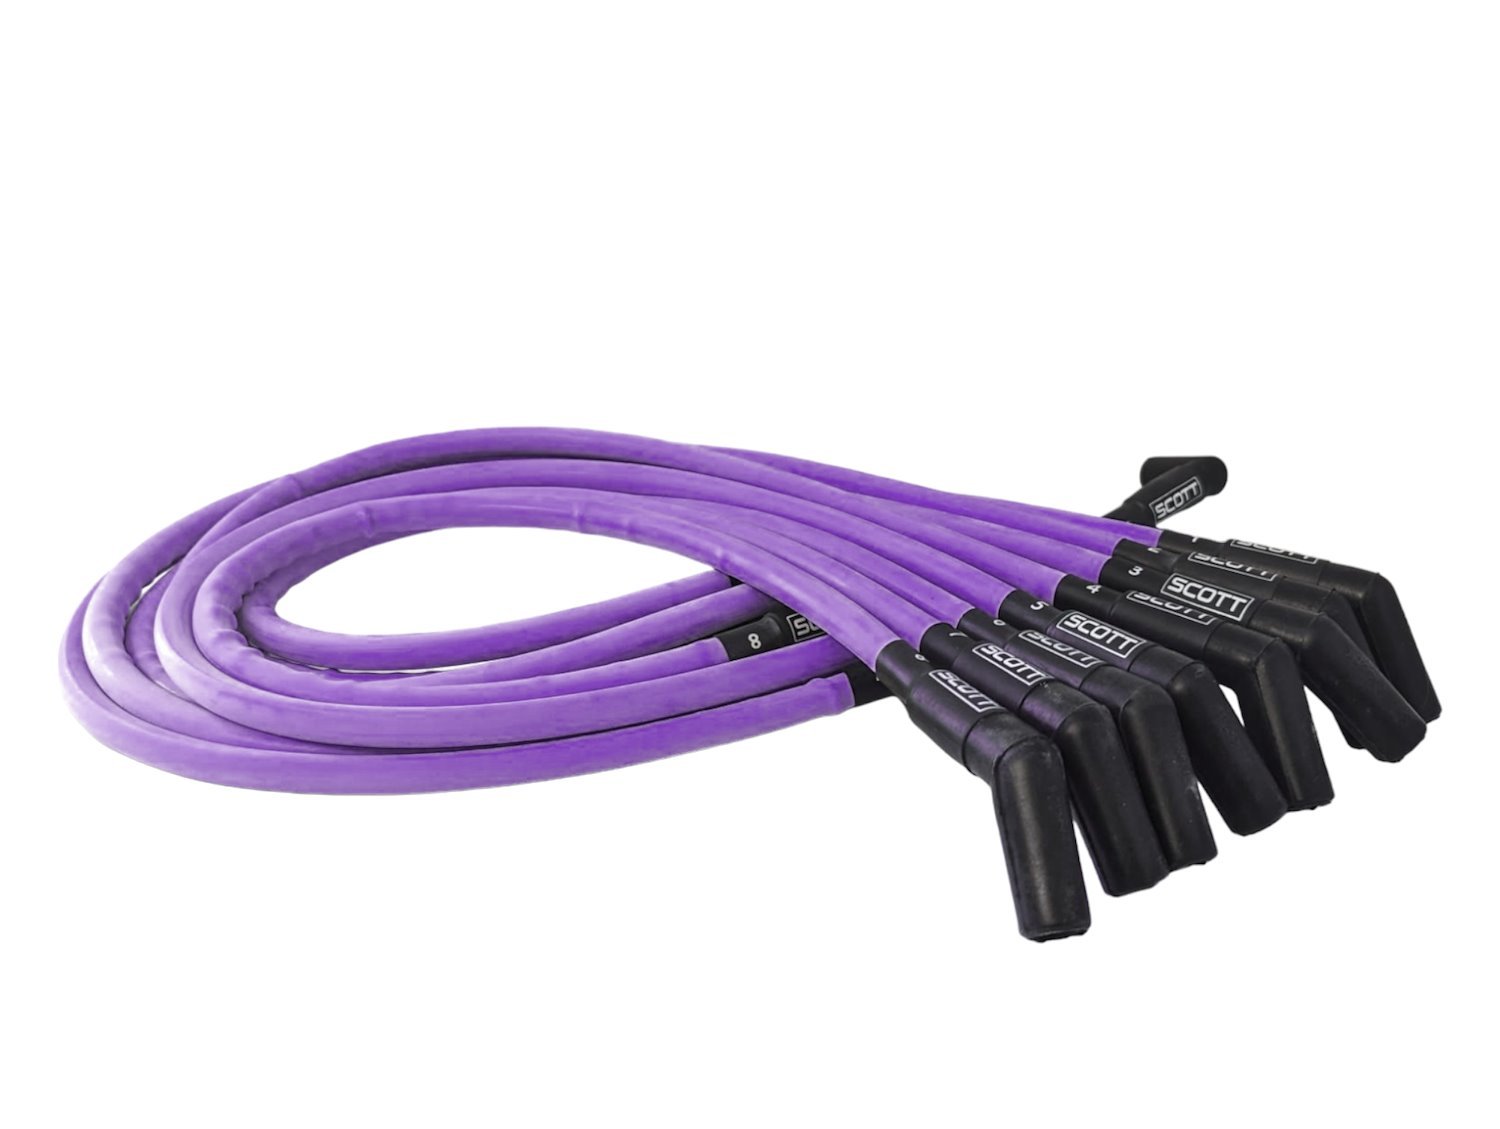 SPW-CH-415-6 High-Performance Silicone-Sleeved Spark Plug Wire Set for Big Block Chevy, Over Valve Cover [Purple]